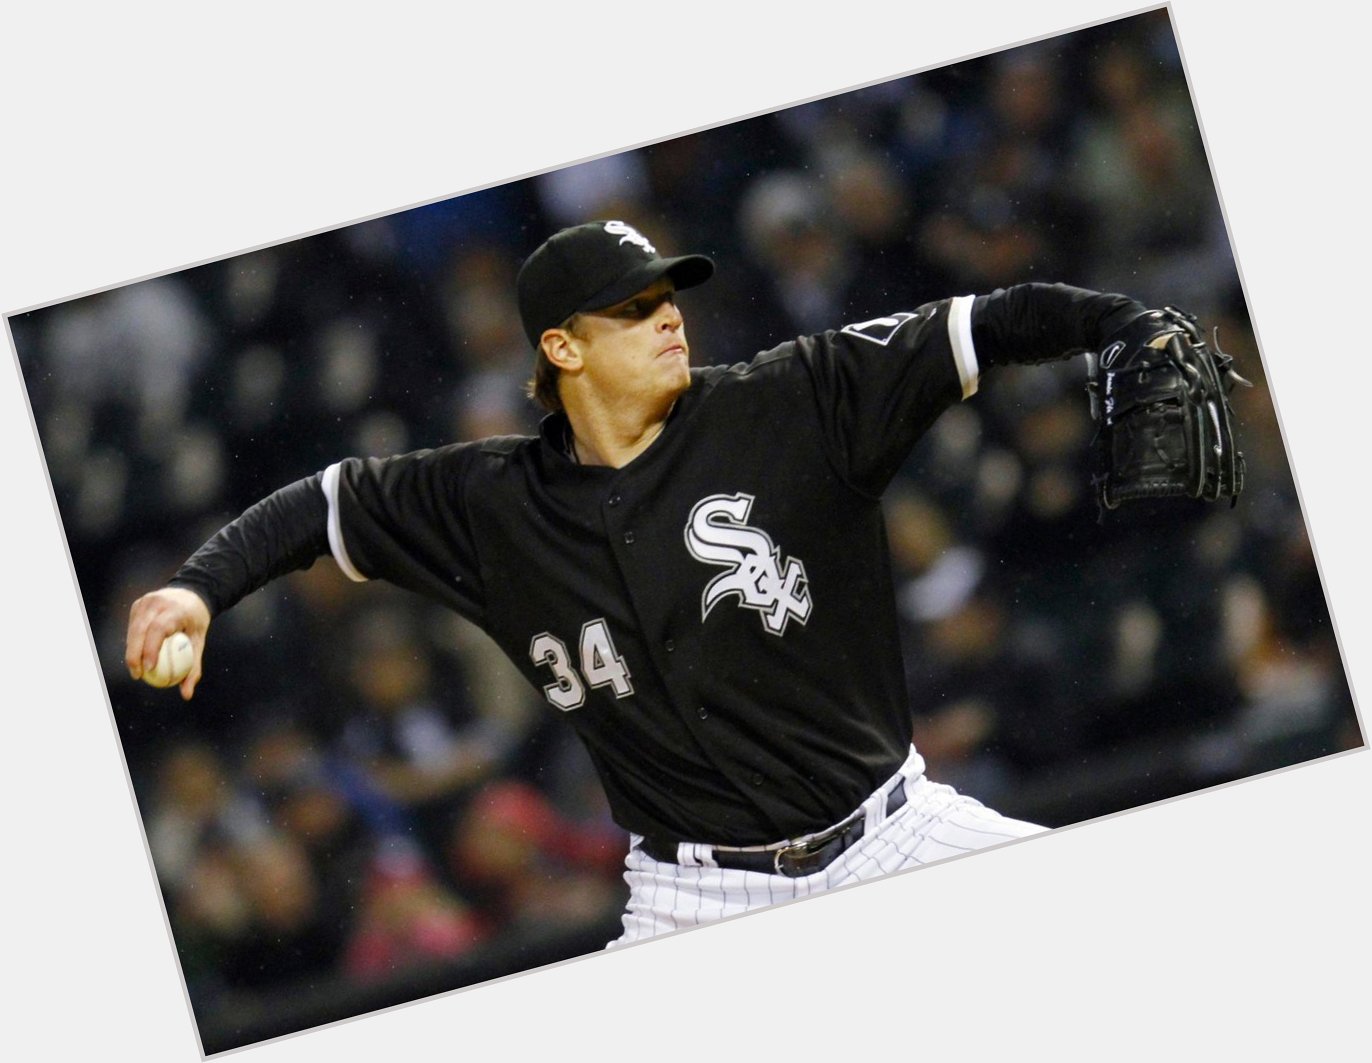 Happy 32nd Birthday to former Gavin Floyd! A Sox 2007-2013, he had a 4.22 ERA in 175 games and 1042.2 IP. 